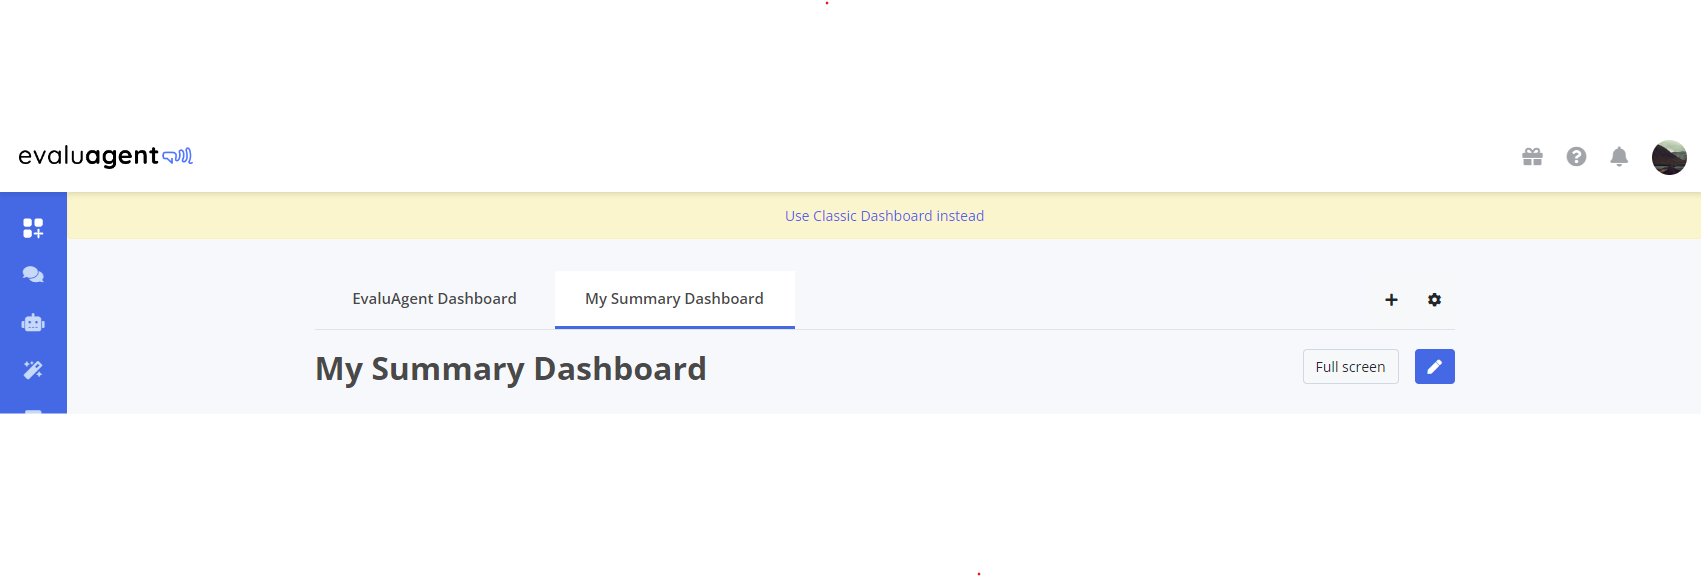 4 - Adding Another Dashboard.png